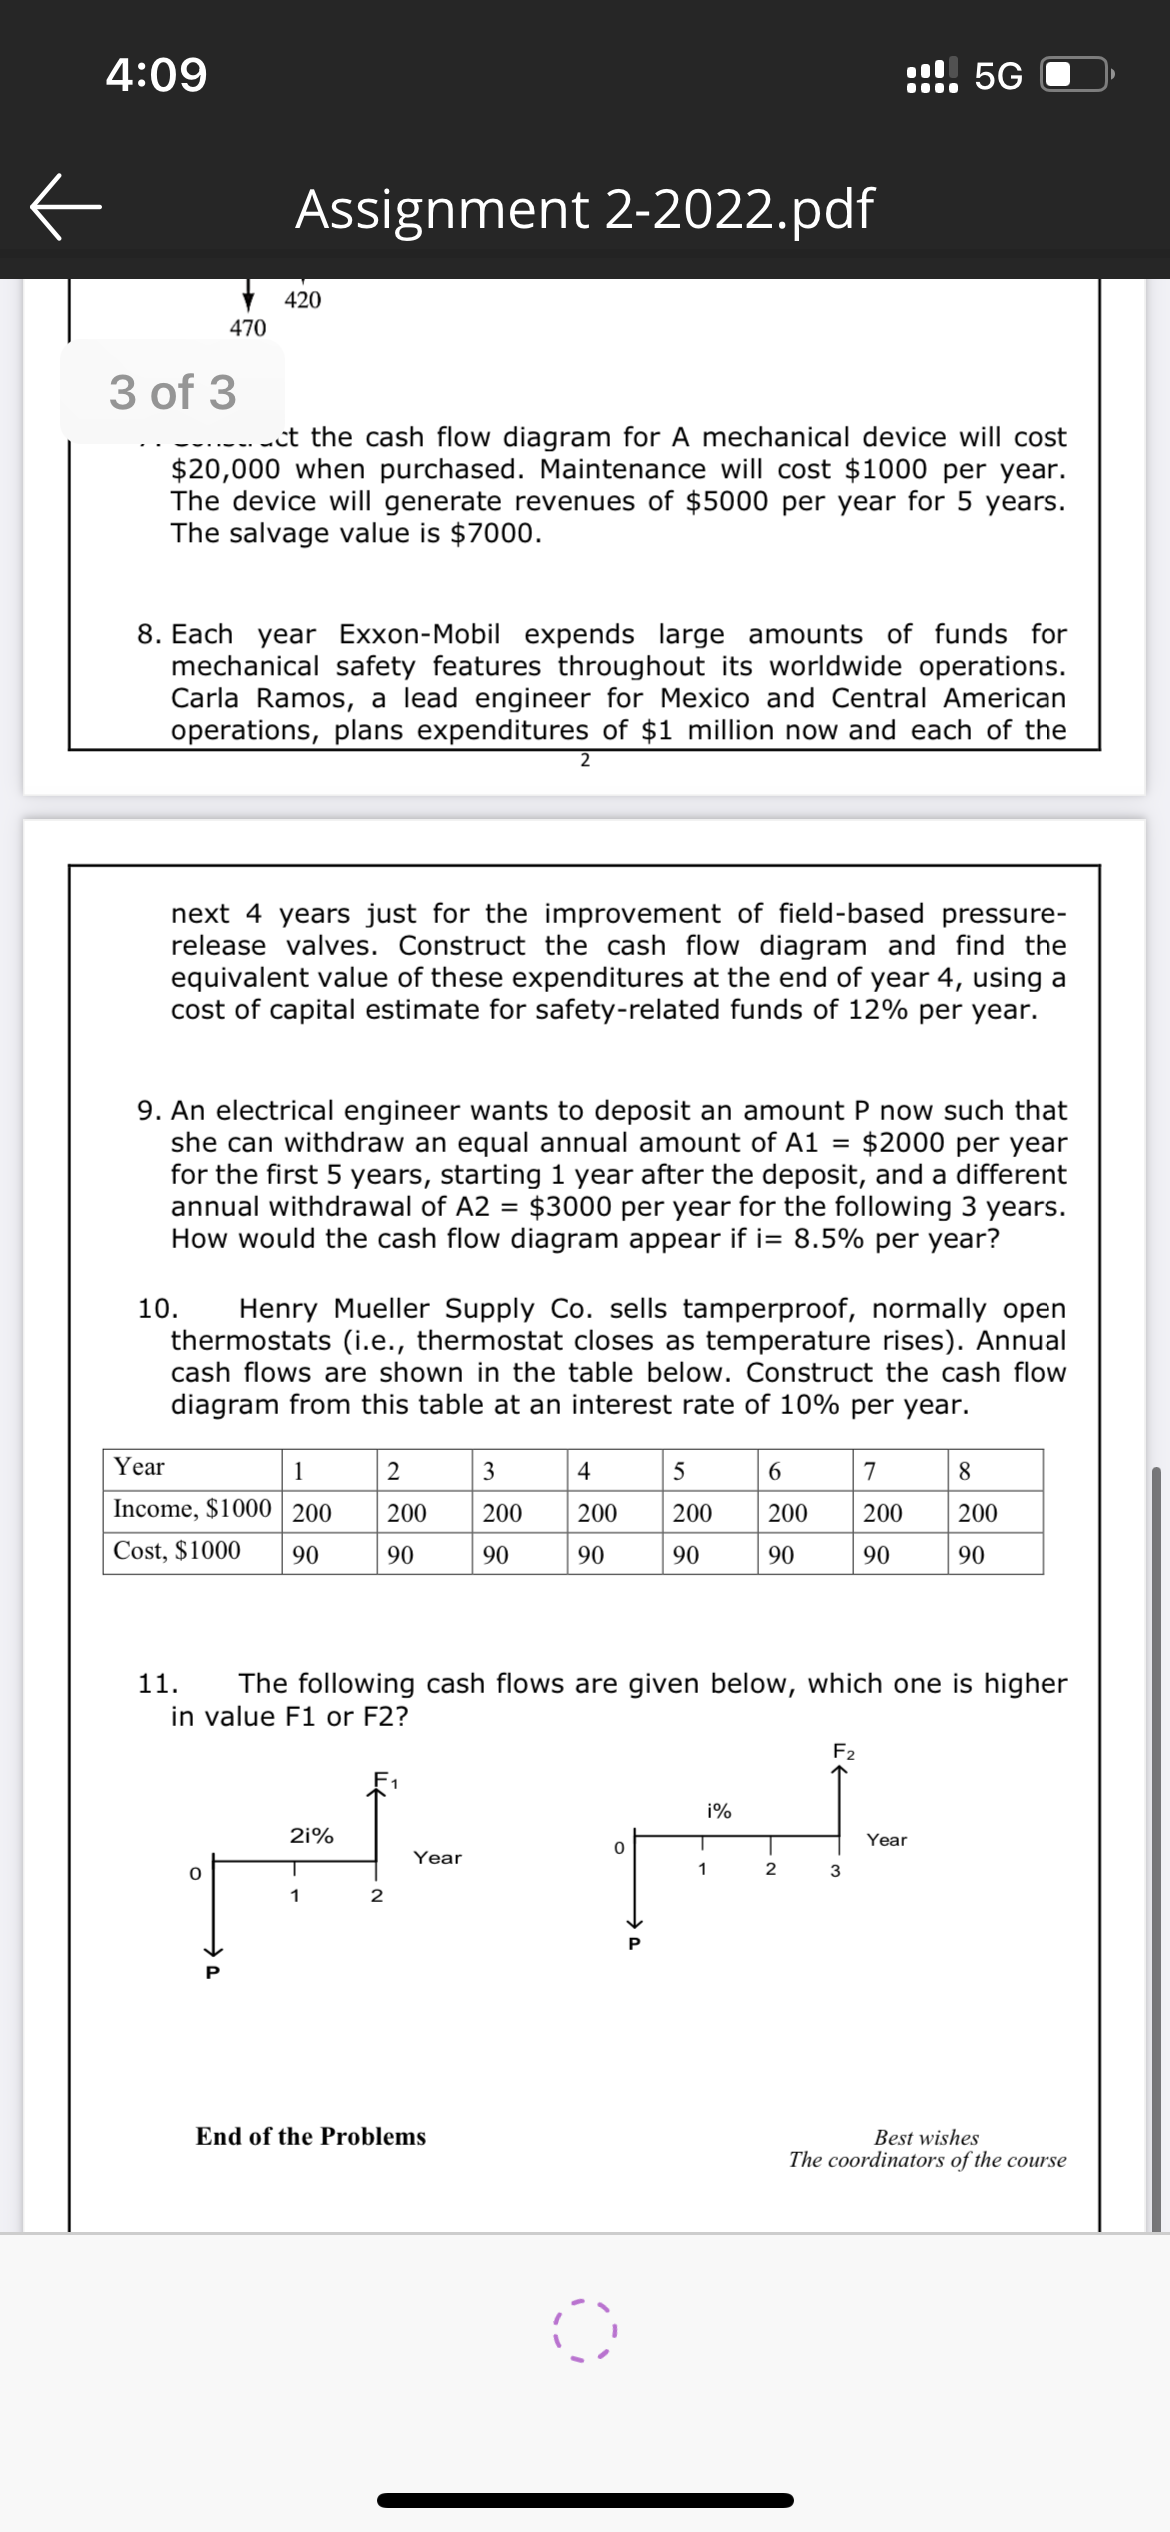 4:09
470
3 of 3
Assignment 2-2022.pdf
420
ct the cash flow diagram for A mechanical device will cost
$20,000 when purchased. Maintenance will cost $1000 per year.
The device will generate revenues of $5000 per year for 5 years.
The salvage value is $7000.
8. Each year Exxon-Mobil expends large amounts of funds for
mechanical safety features throughout its worldwide operations.
Carla Ramos, a lead engineer for Mexico and Central American
operations, plans expenditures of $1 million now and each of the
2
next 4 years just for the improvement of field-based pressure-
release valves. Construct the cash flow diagram and find the
equivalent value of these expenditures at the end of year 4, using a
cost of capital estimate for safety-related funds of 12% per year.
9. An electrical engineer wants to deposit an amount P now such that
she can withdraw an equal annual amount of A1 $2000 per year
for the first 5 years, starting 1 year after the deposit, and a different
annual withdrawal of A2 = $3000 per year for the following 3 years.
How would the cash flow diagram appear if i= 8.5% per year?
0
Year
1
Income, $1000 200
Cost, $1000
90
10. Henry Mueller Supply Co. sells tamperproof, normally open
thermostats (i.e., thermostat closes as temperature rises). Annual
cash flows are shown in the table below. Construct the cash flow
diagram from this table at an interest rate of 10% per year.
2
200
90
21%
T
1
2
Year
3
200
90
End of the Problems
4
200
90
11. The following cash flows are given below, which one is higher
in value F1 or F2?
:!!! 5G
5
200
90
0
6
200
90
O
=
7
200
90
F₂
i%
Year
H
1
2
3
-N
8
200
90
Best wishes
The coordinators of the course